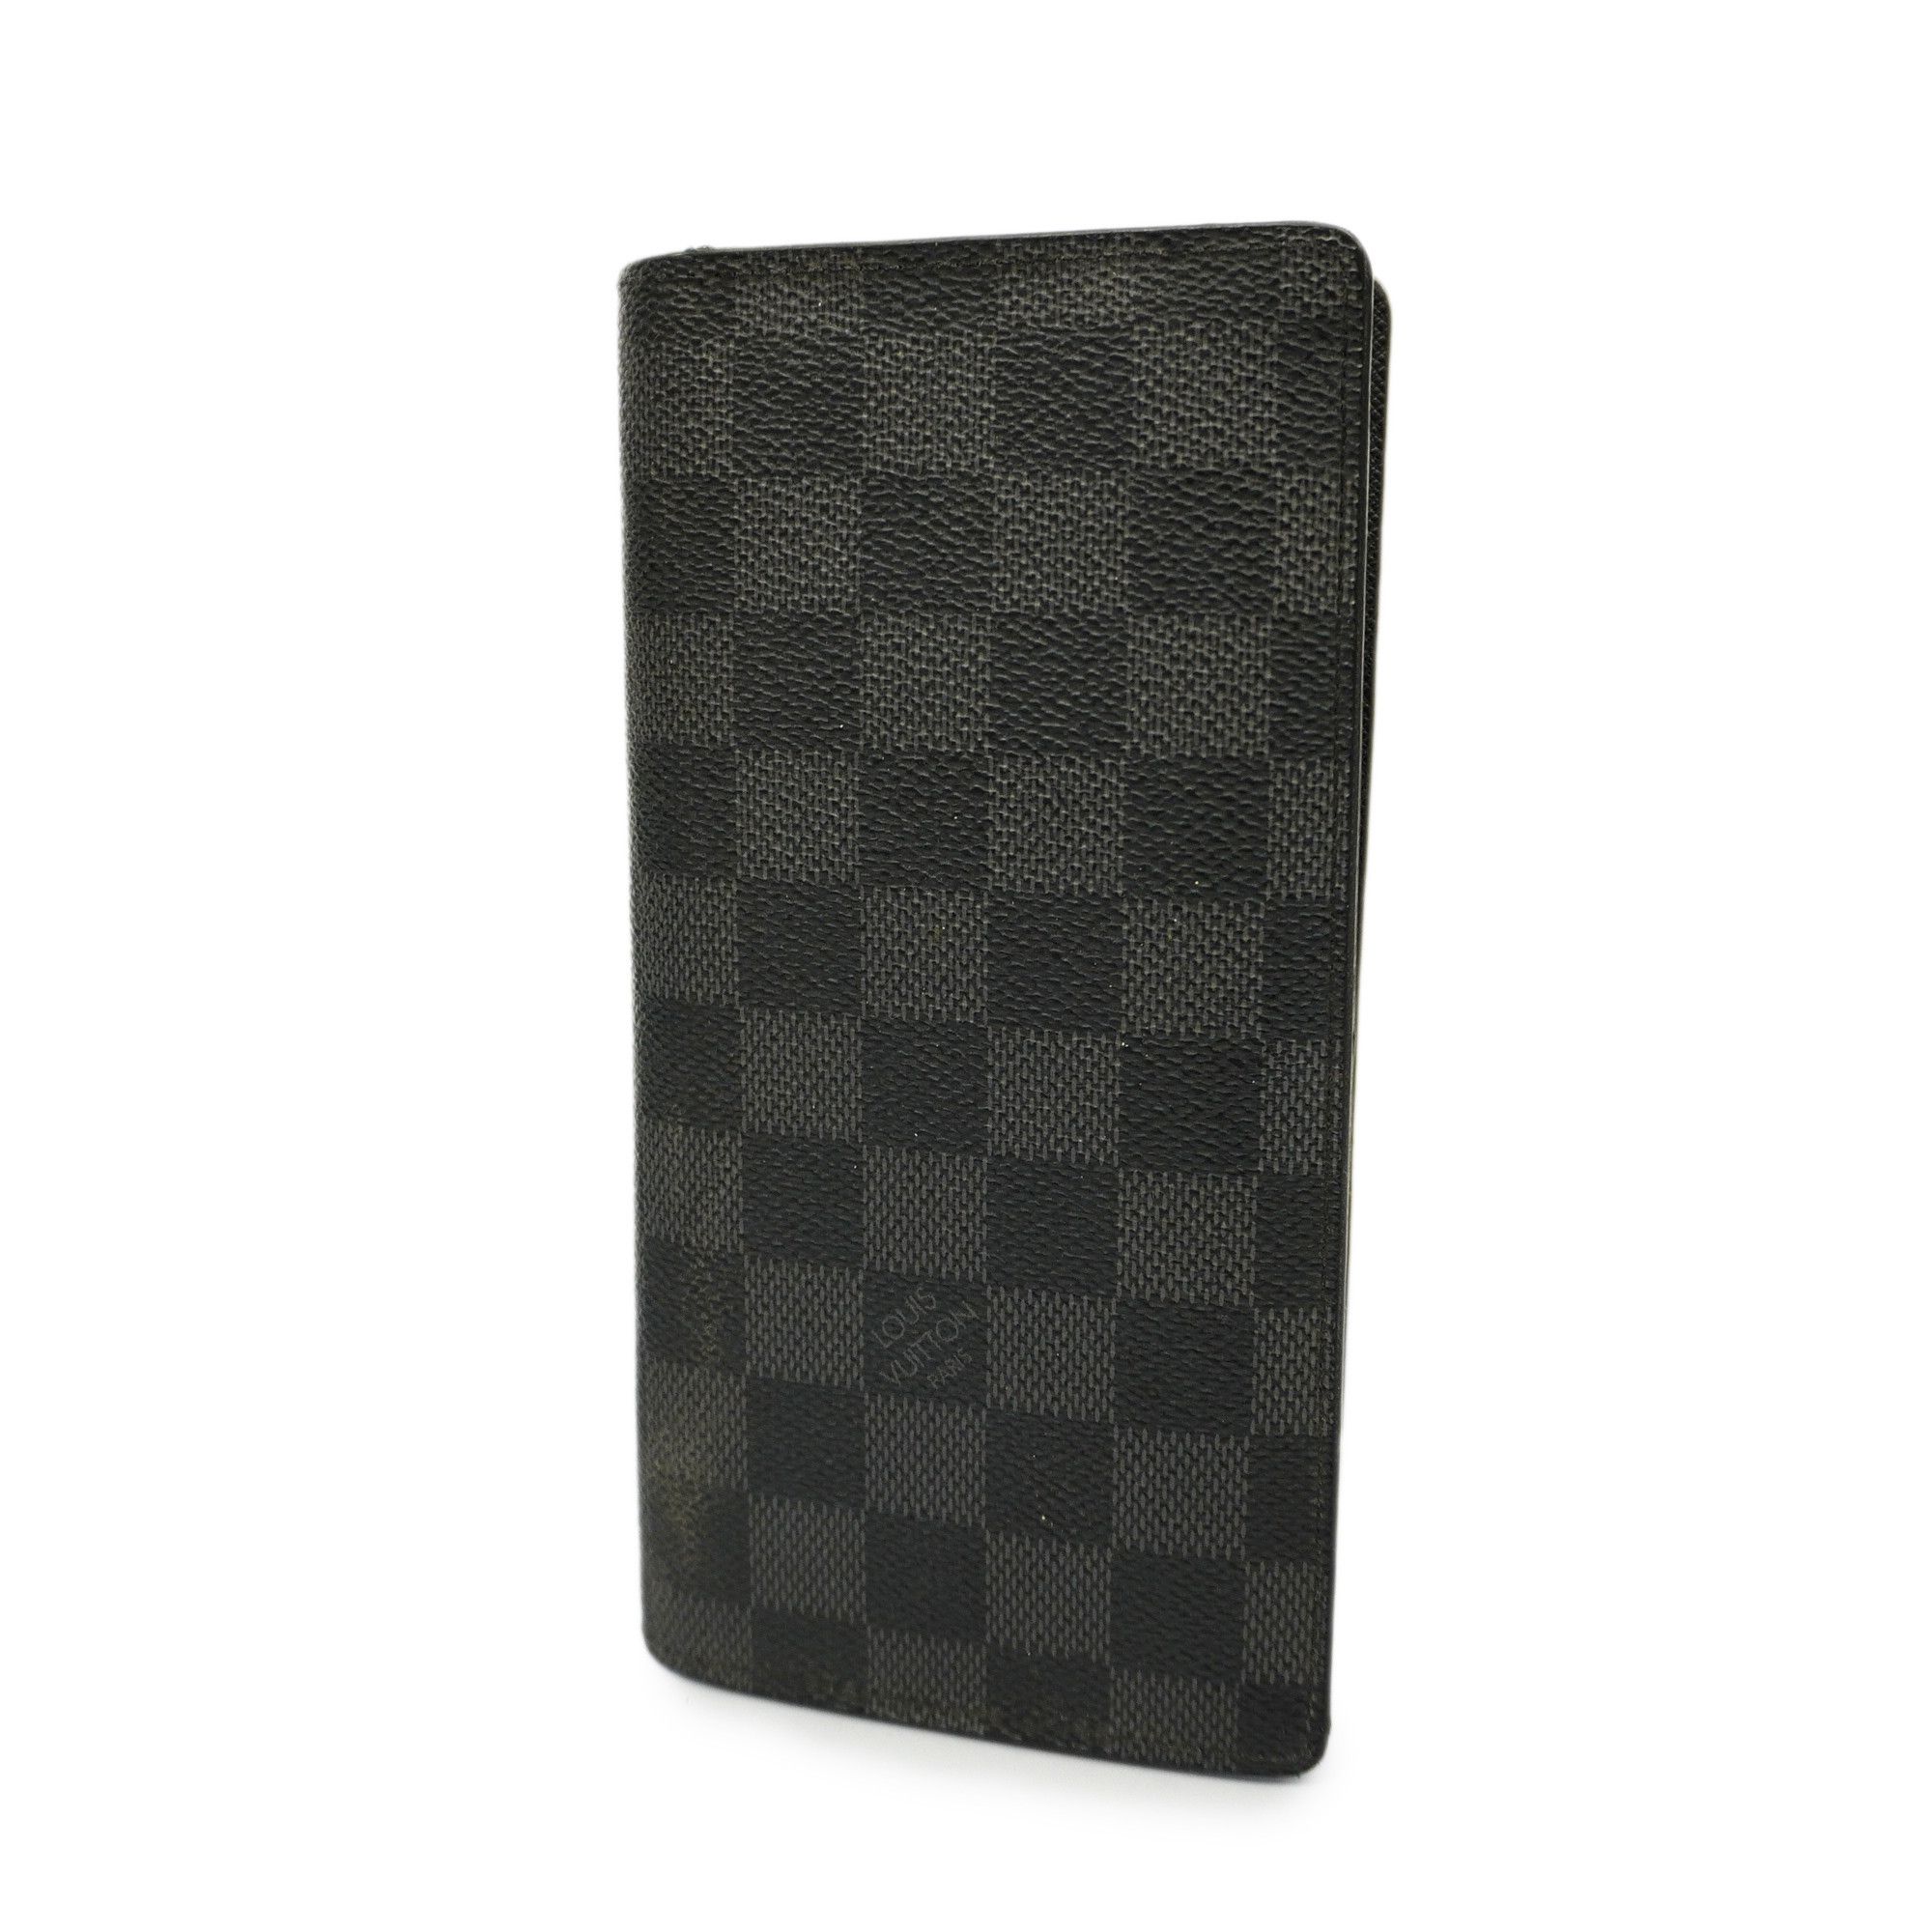 Auth Louis Vuitton Damier Graphite Portefeuille Brother N62665